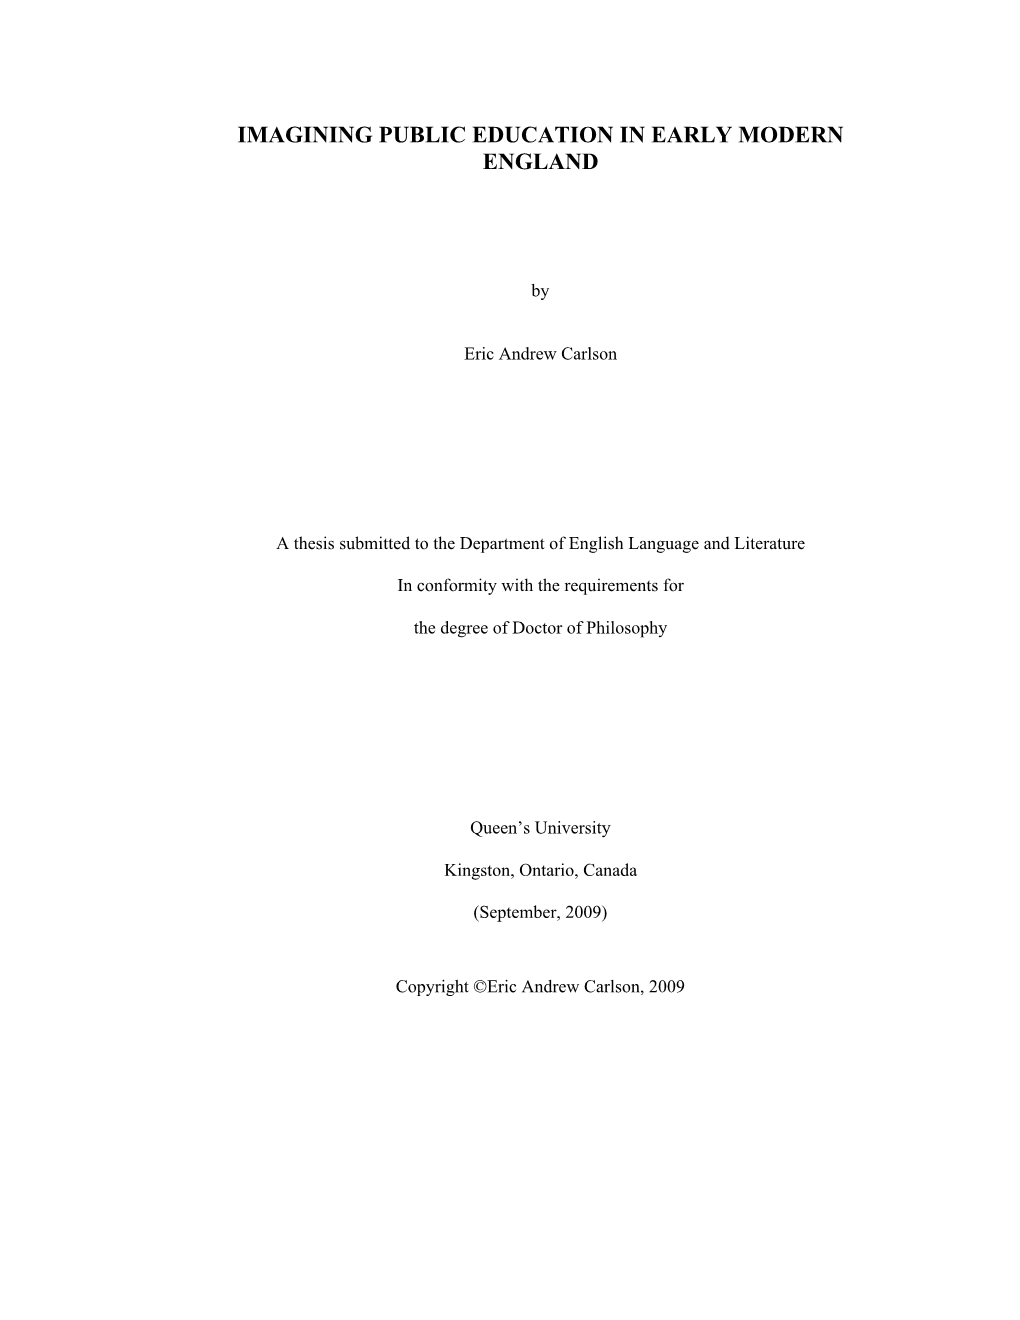 Eric's Thesis